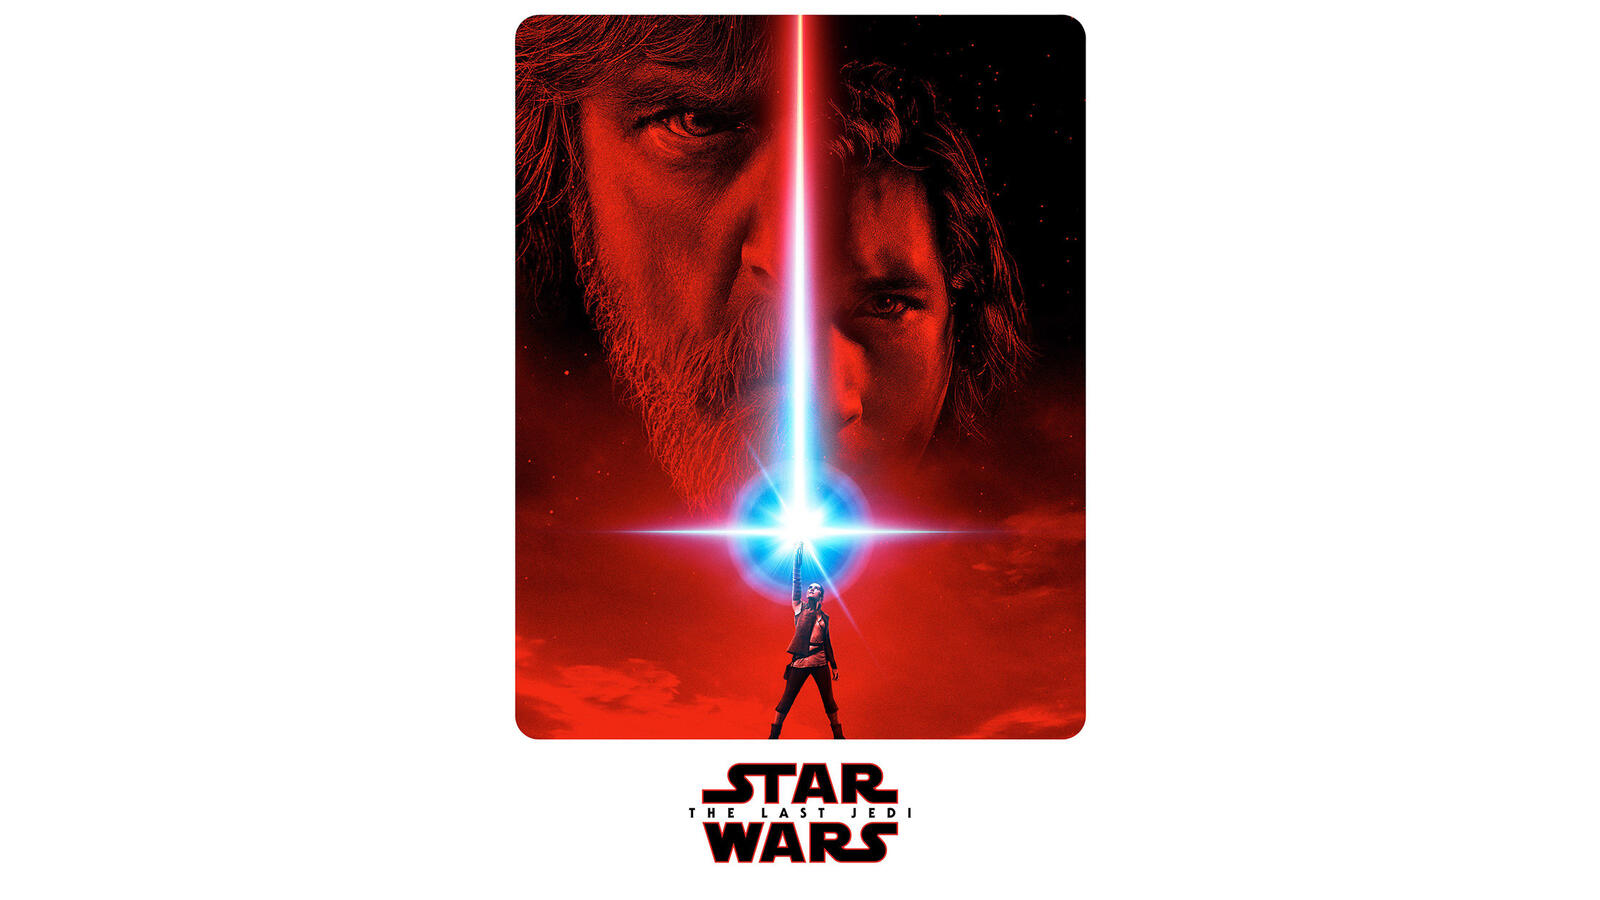 Wallpapers star wars the last jedi 2017 Movies movies on the desktop